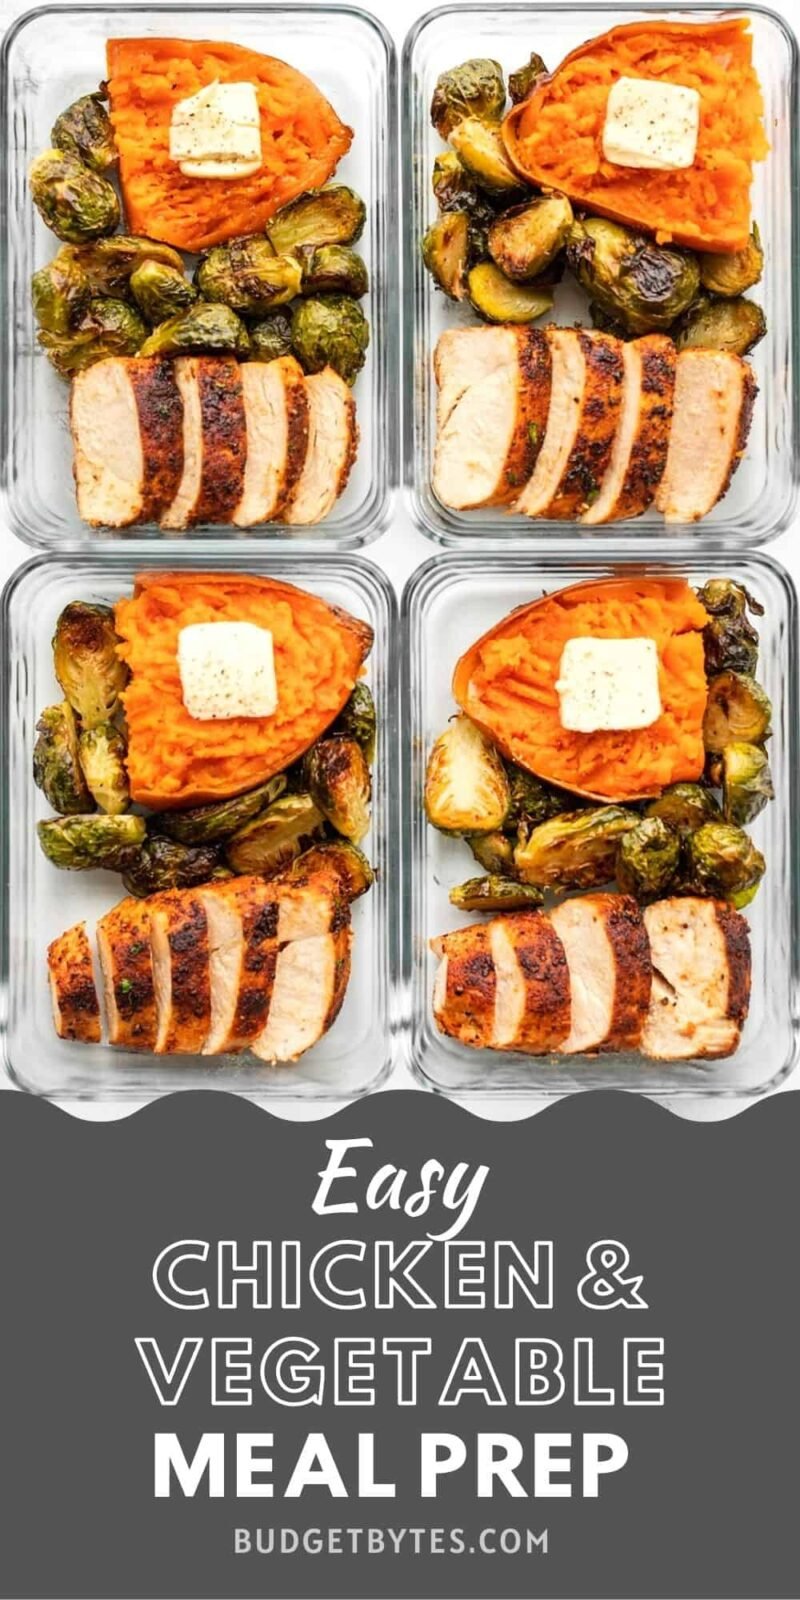 four glass meal prep containers with food, title text at the bottom